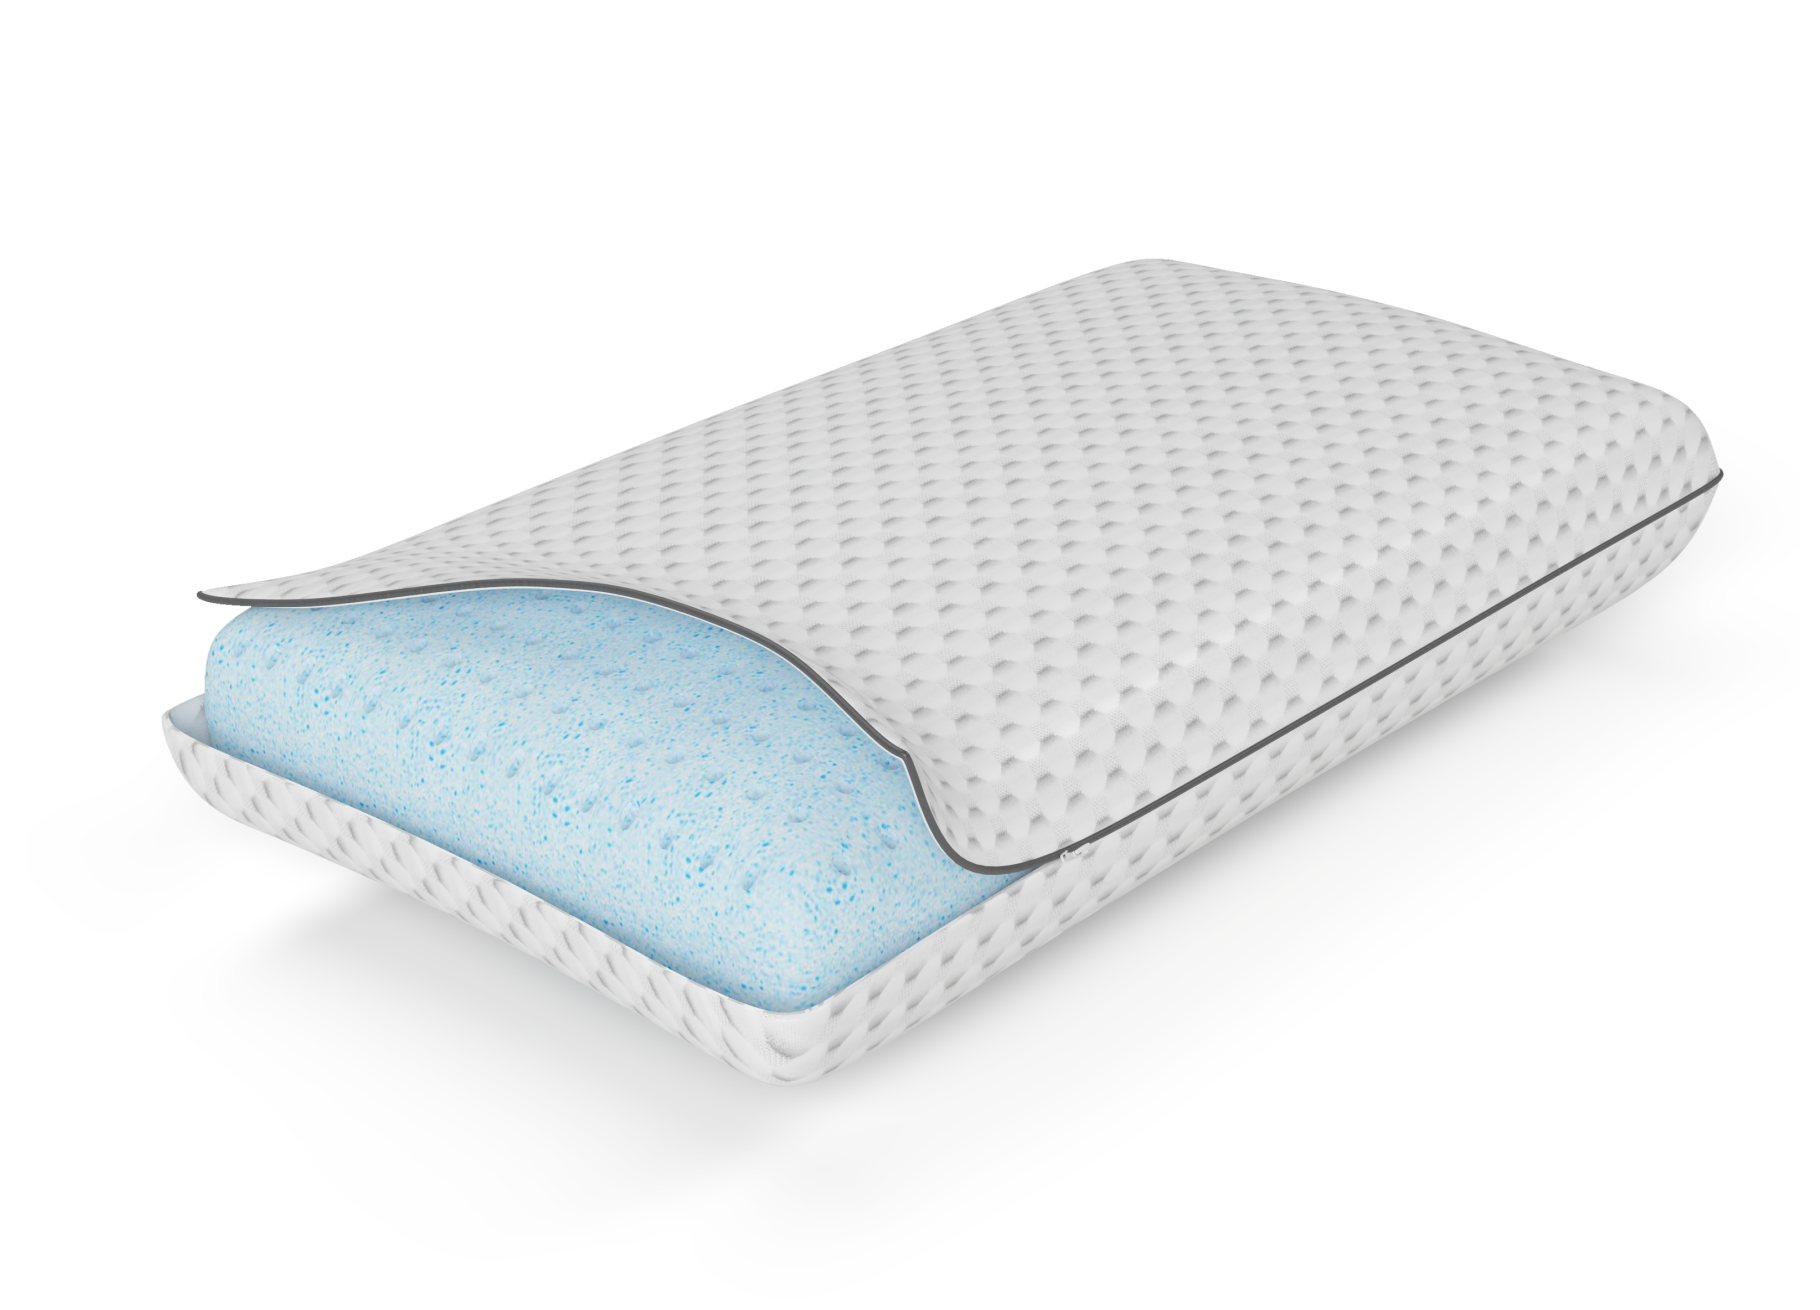 Complete Guide To Washing Memory Foam Pillows – Super Sleeper Pro